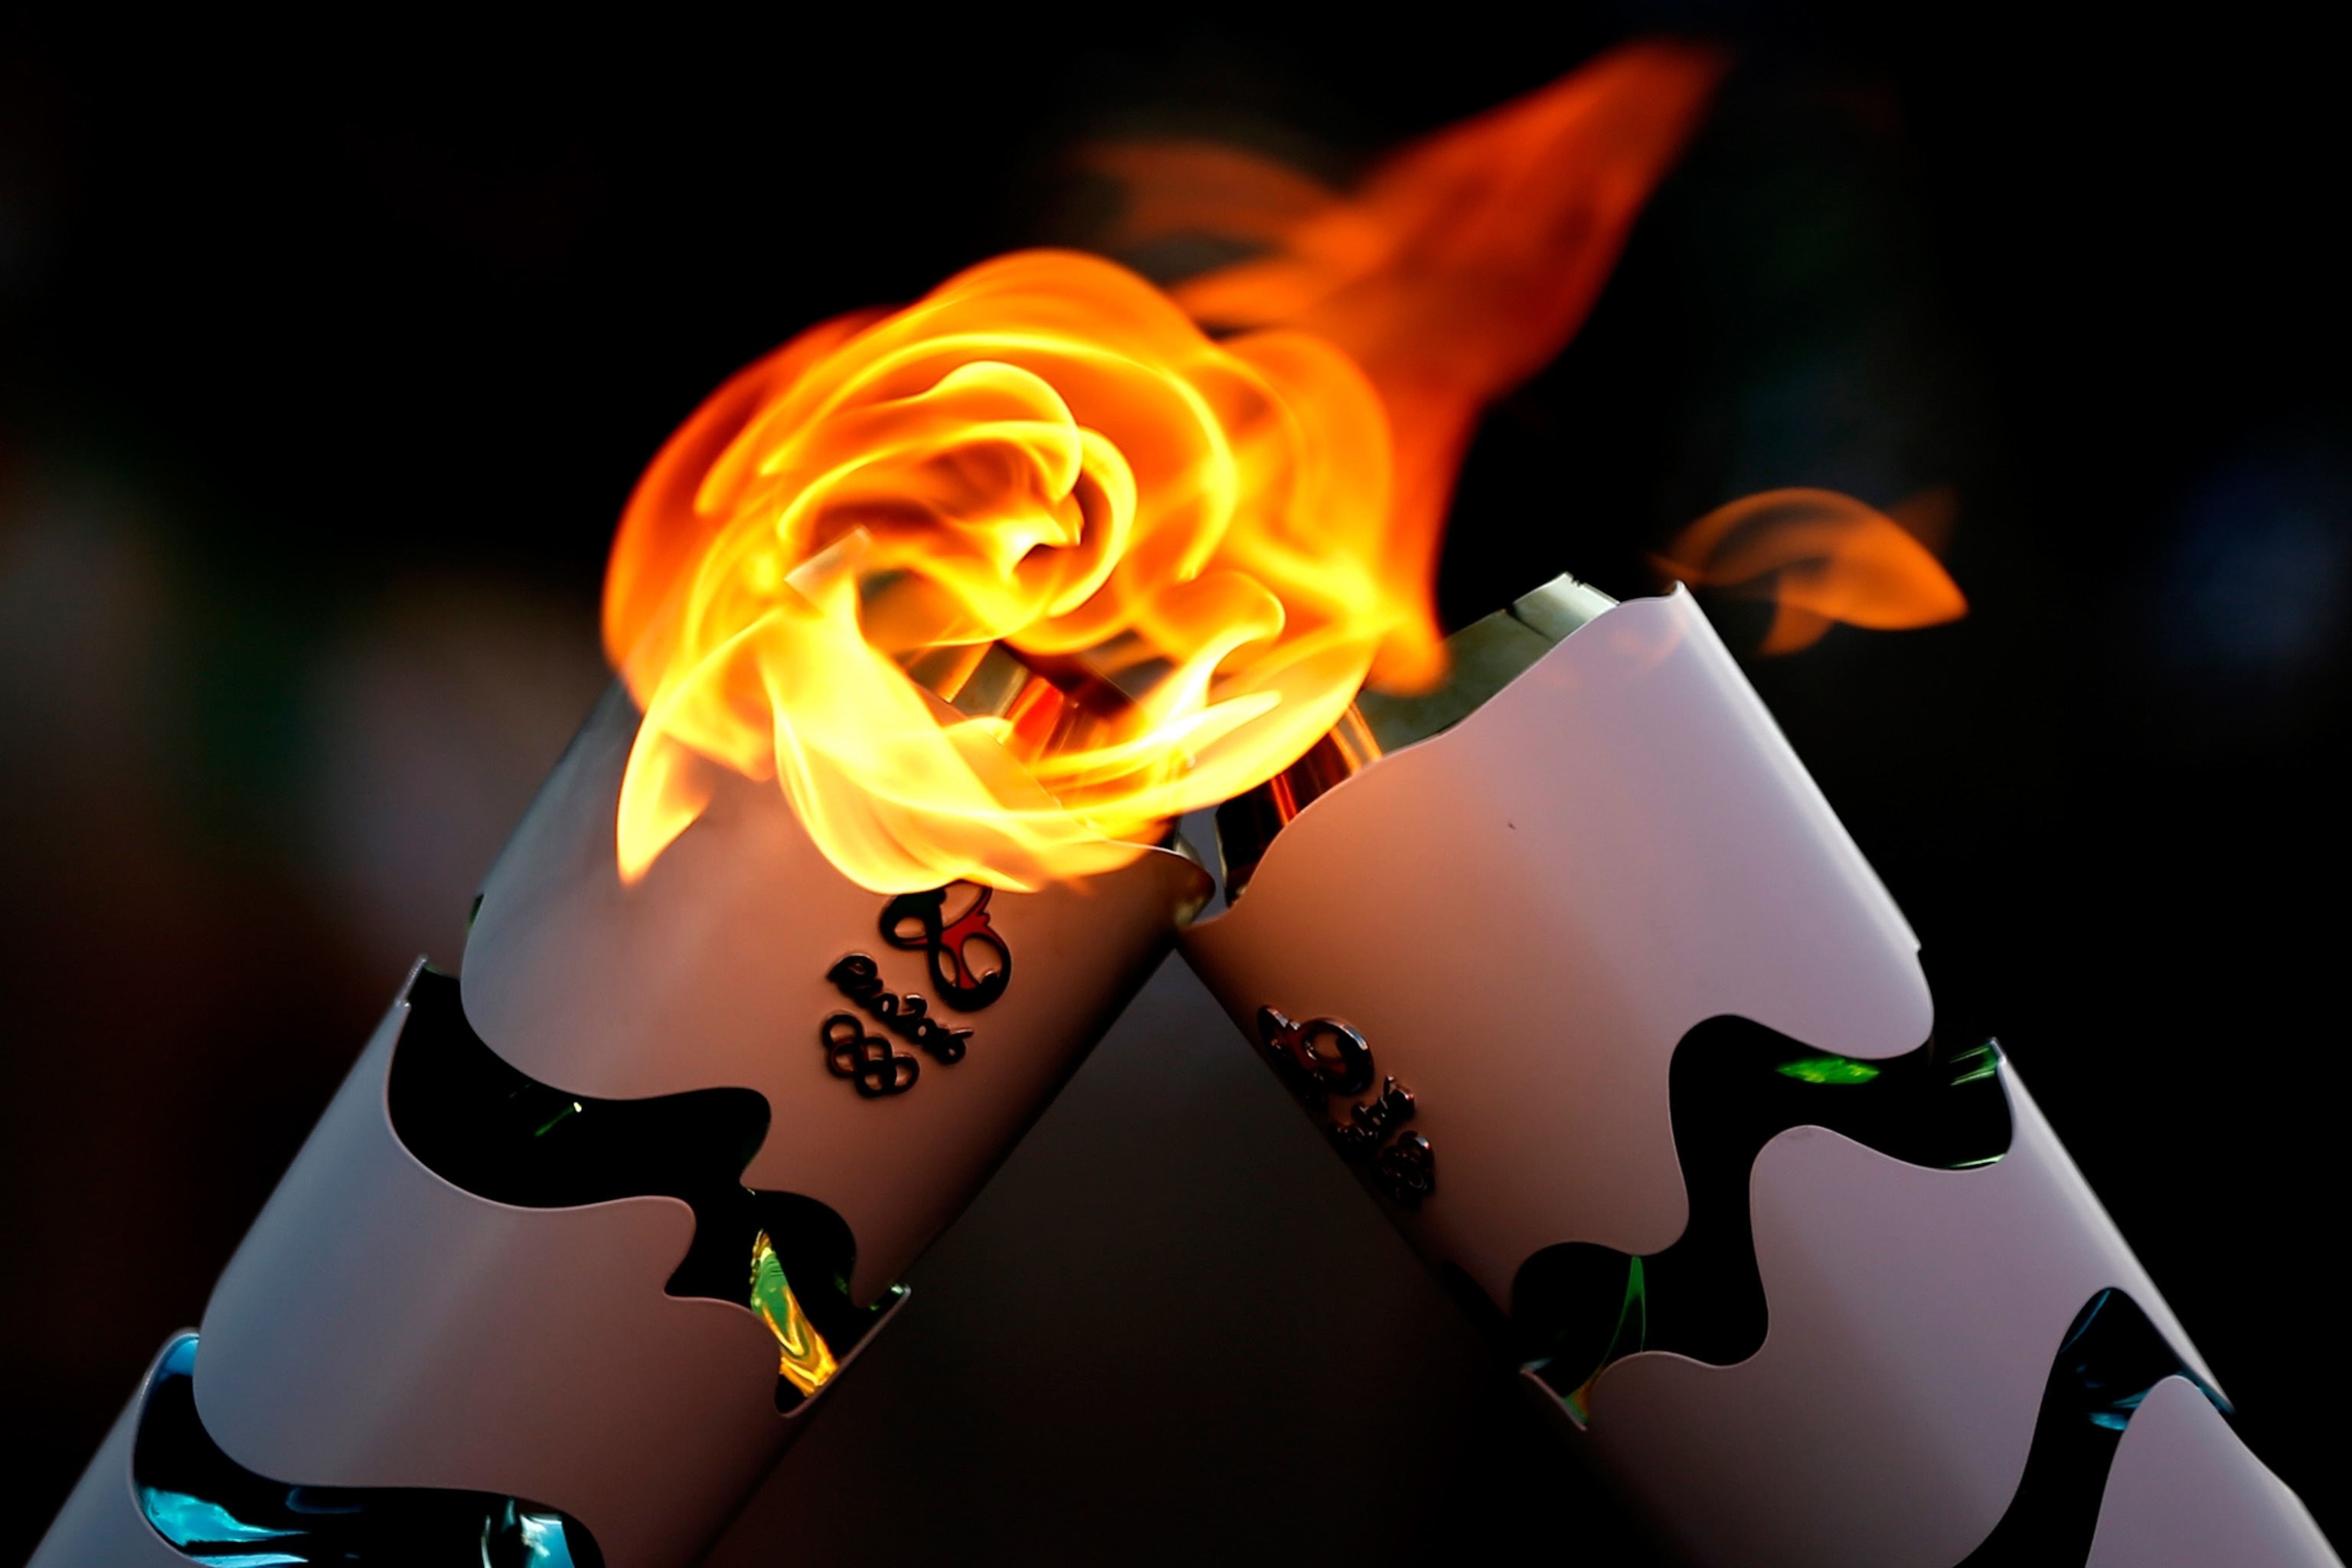 Olympic Flame: Olympic torch relay, Passing the flame through five regions of Brazil, Rio 2016. 3080x2050 HD Wallpaper.